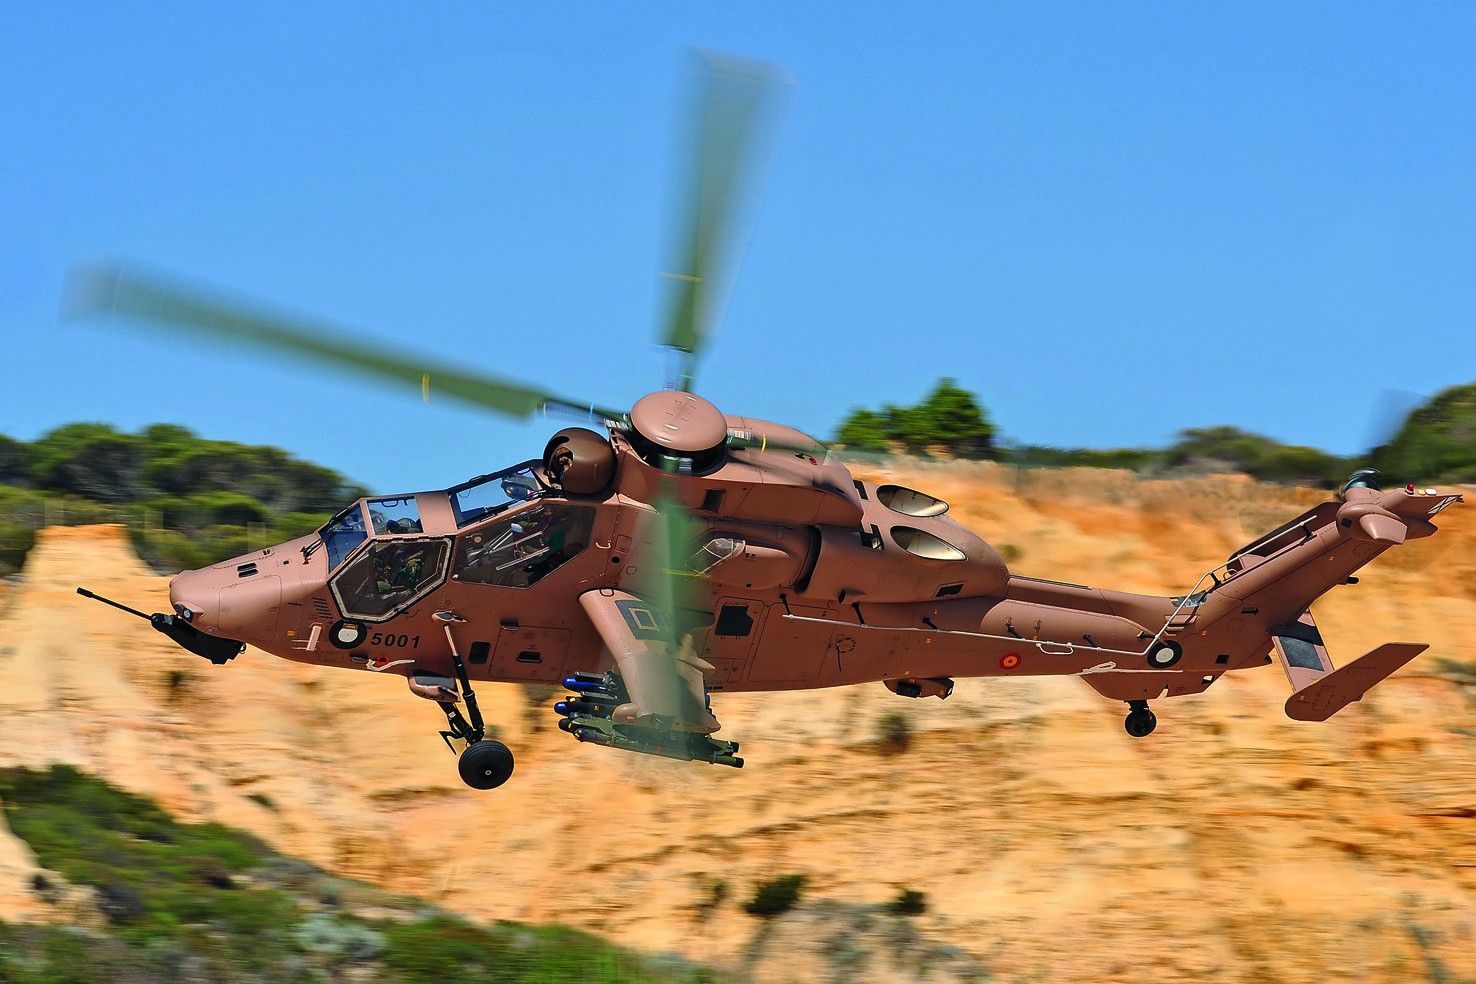 OCCAR has awarded Airbus the upgrade of 60 Tiger